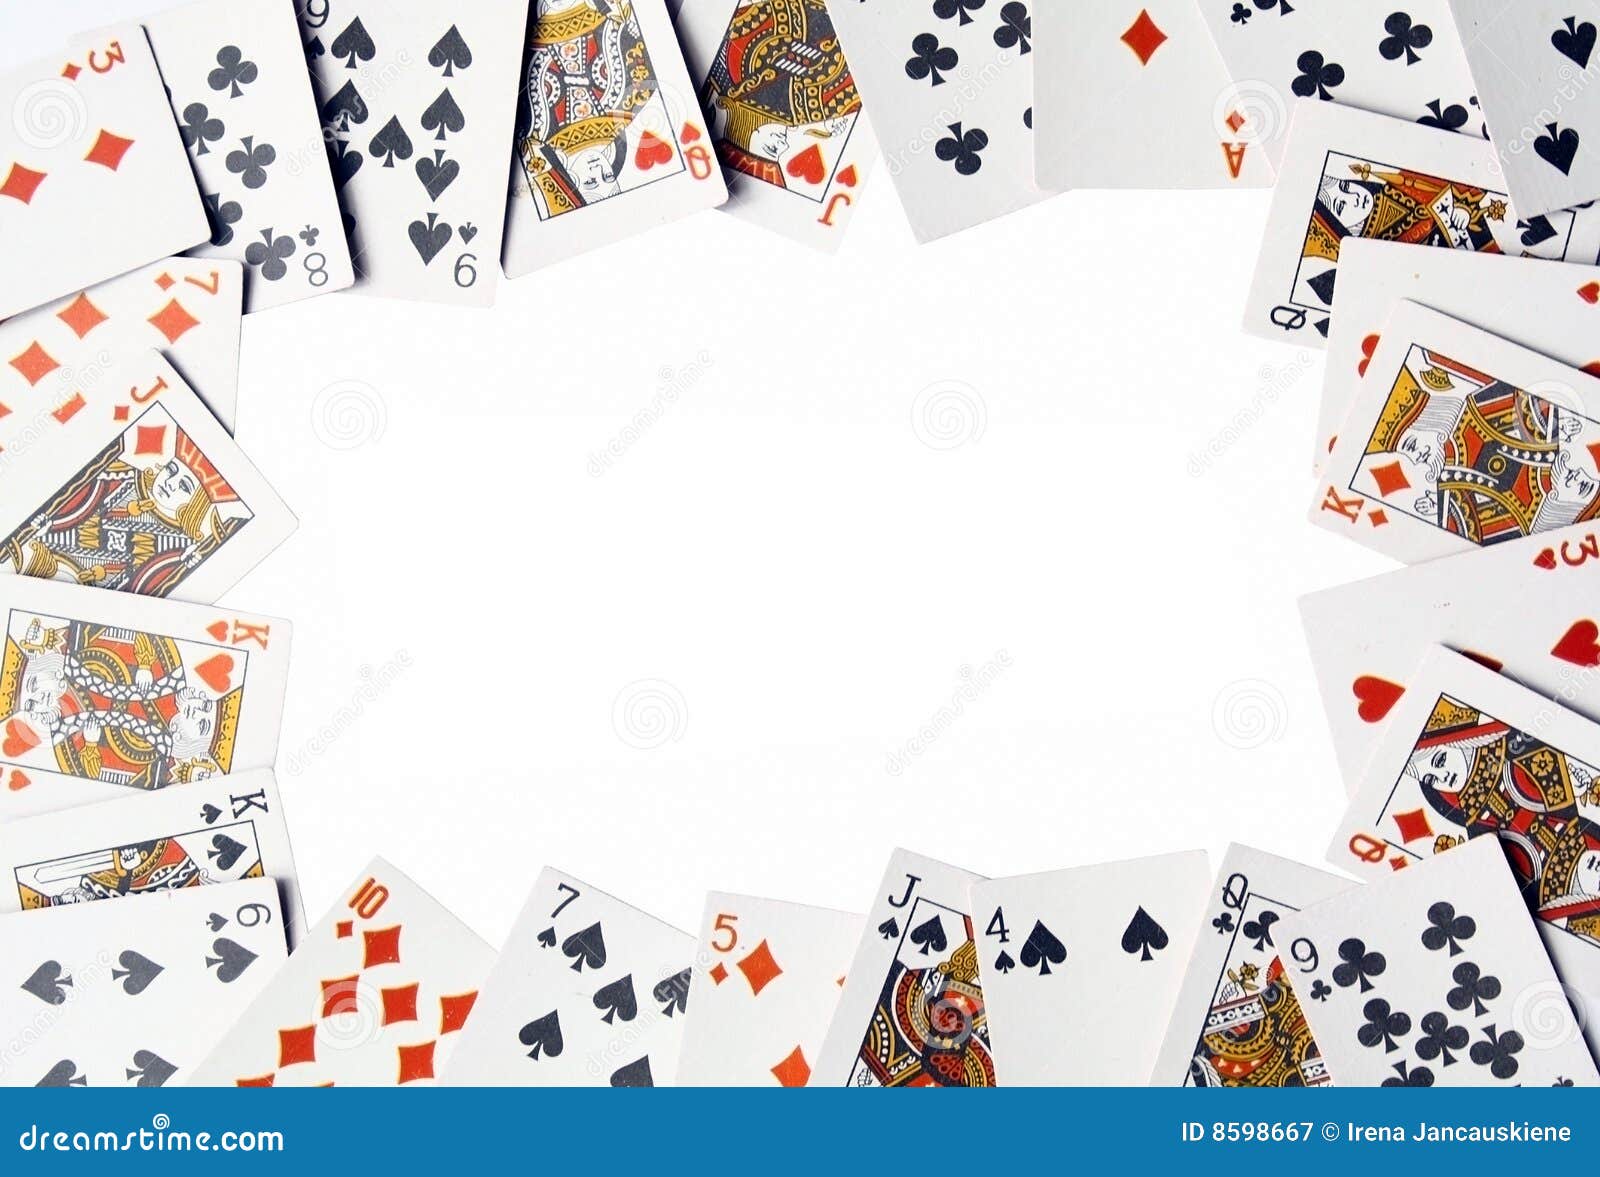 Playing cards stock image. Image of lose, frame, play